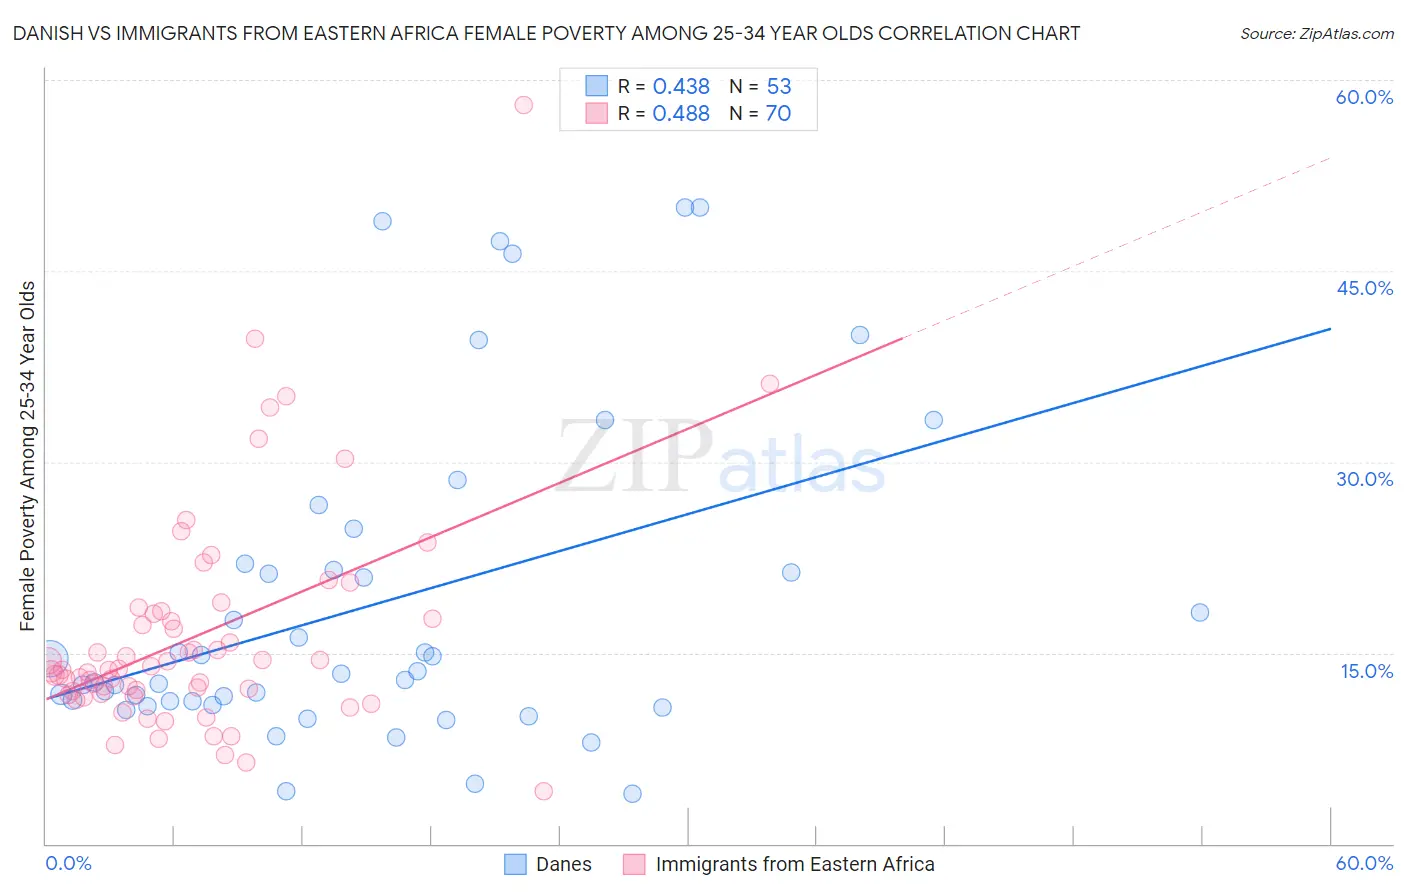 Danish vs Immigrants from Eastern Africa Female Poverty Among 25-34 Year Olds